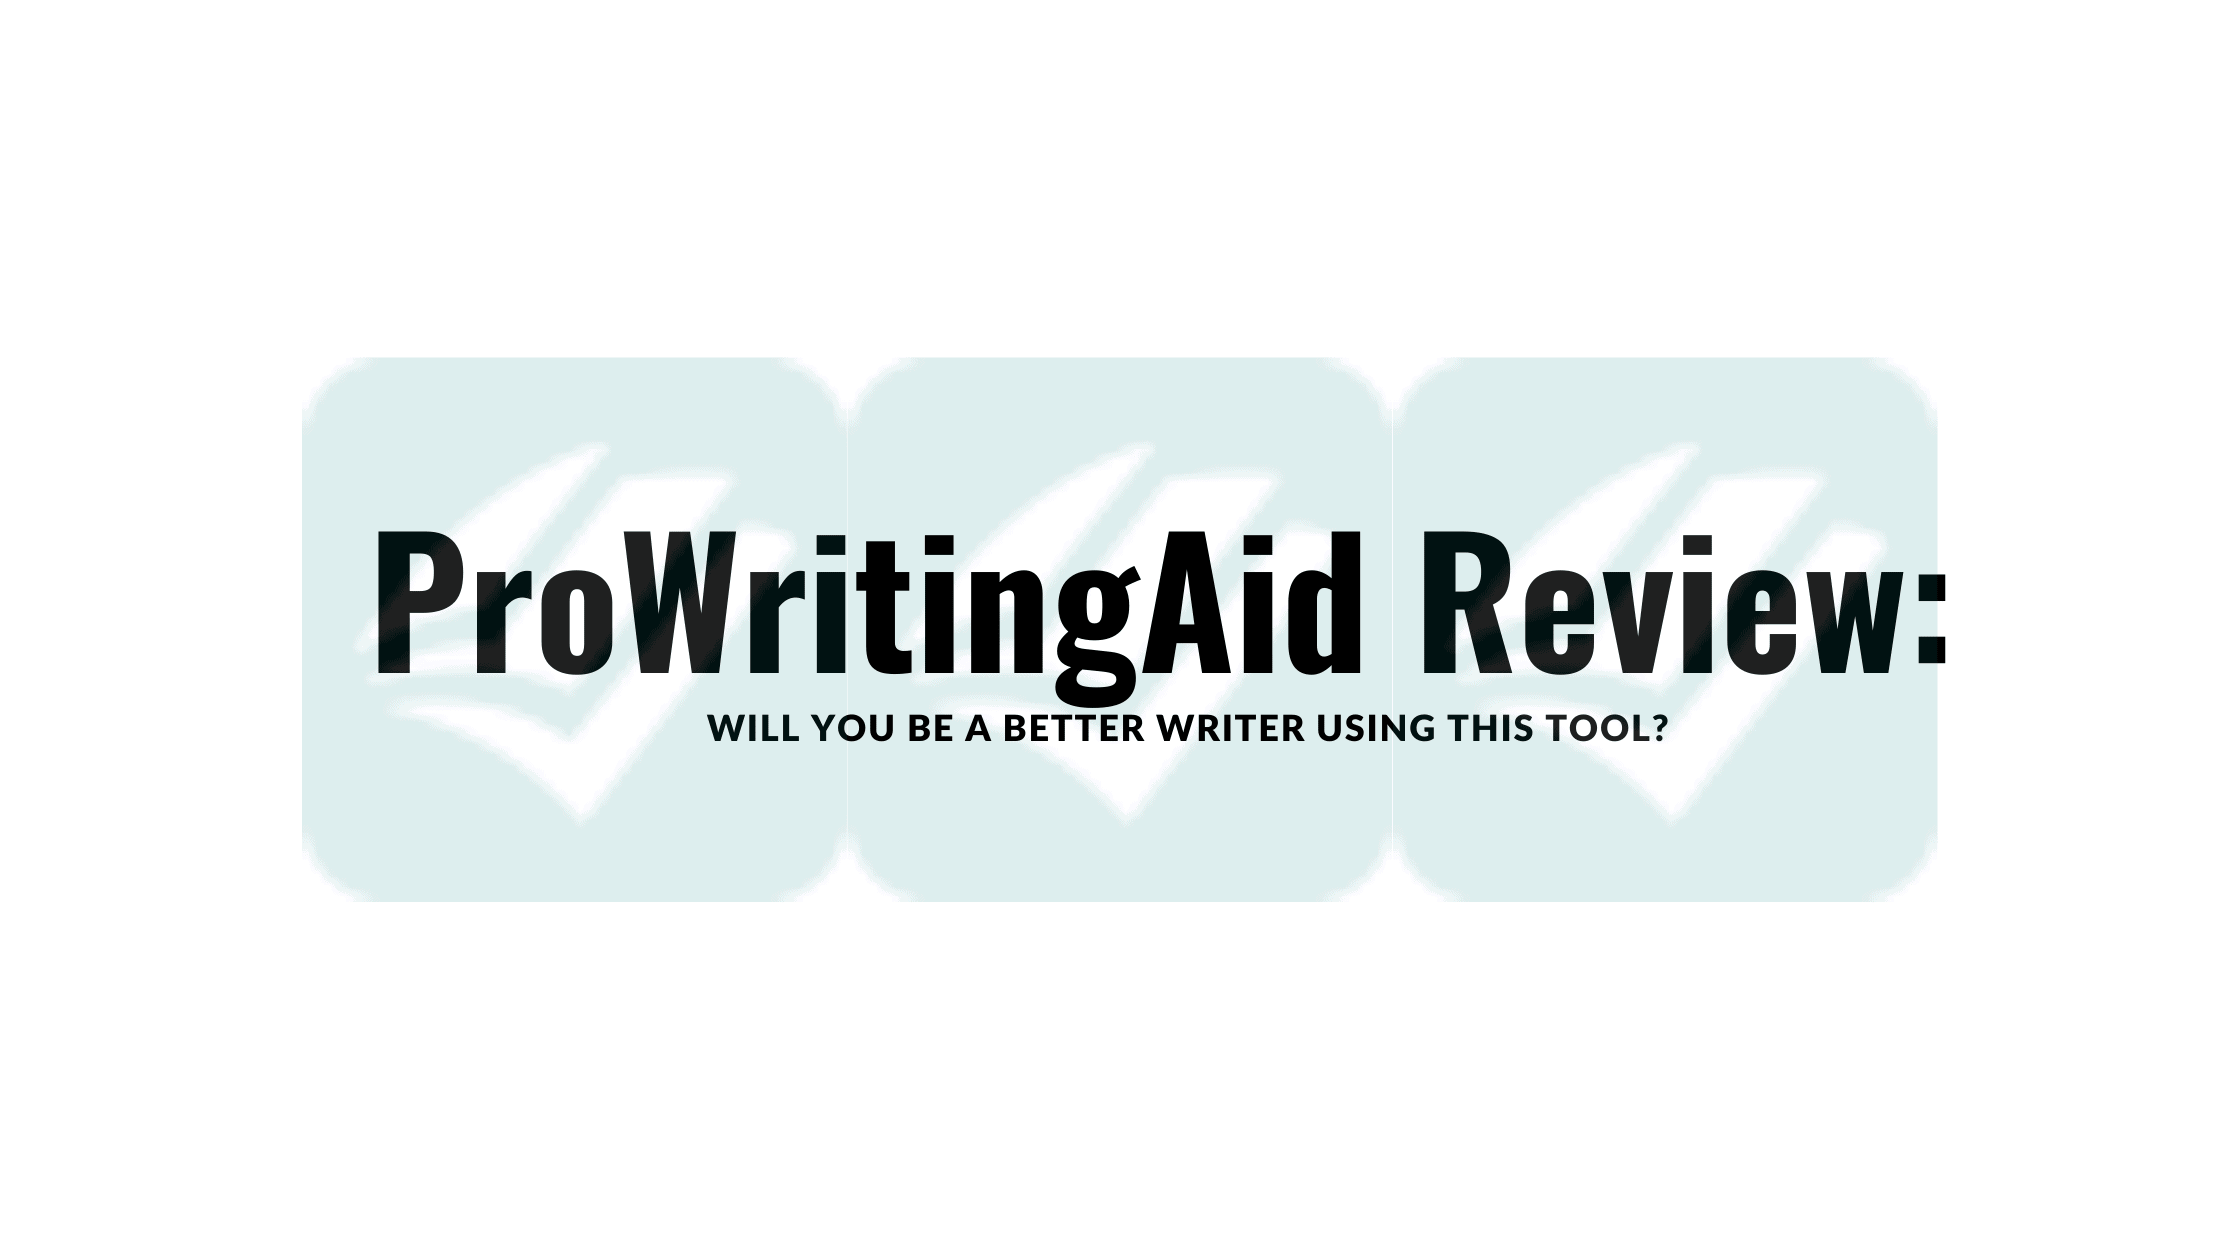 ProWritingAid Review: Will You Be a Better Writer Using This Tool?